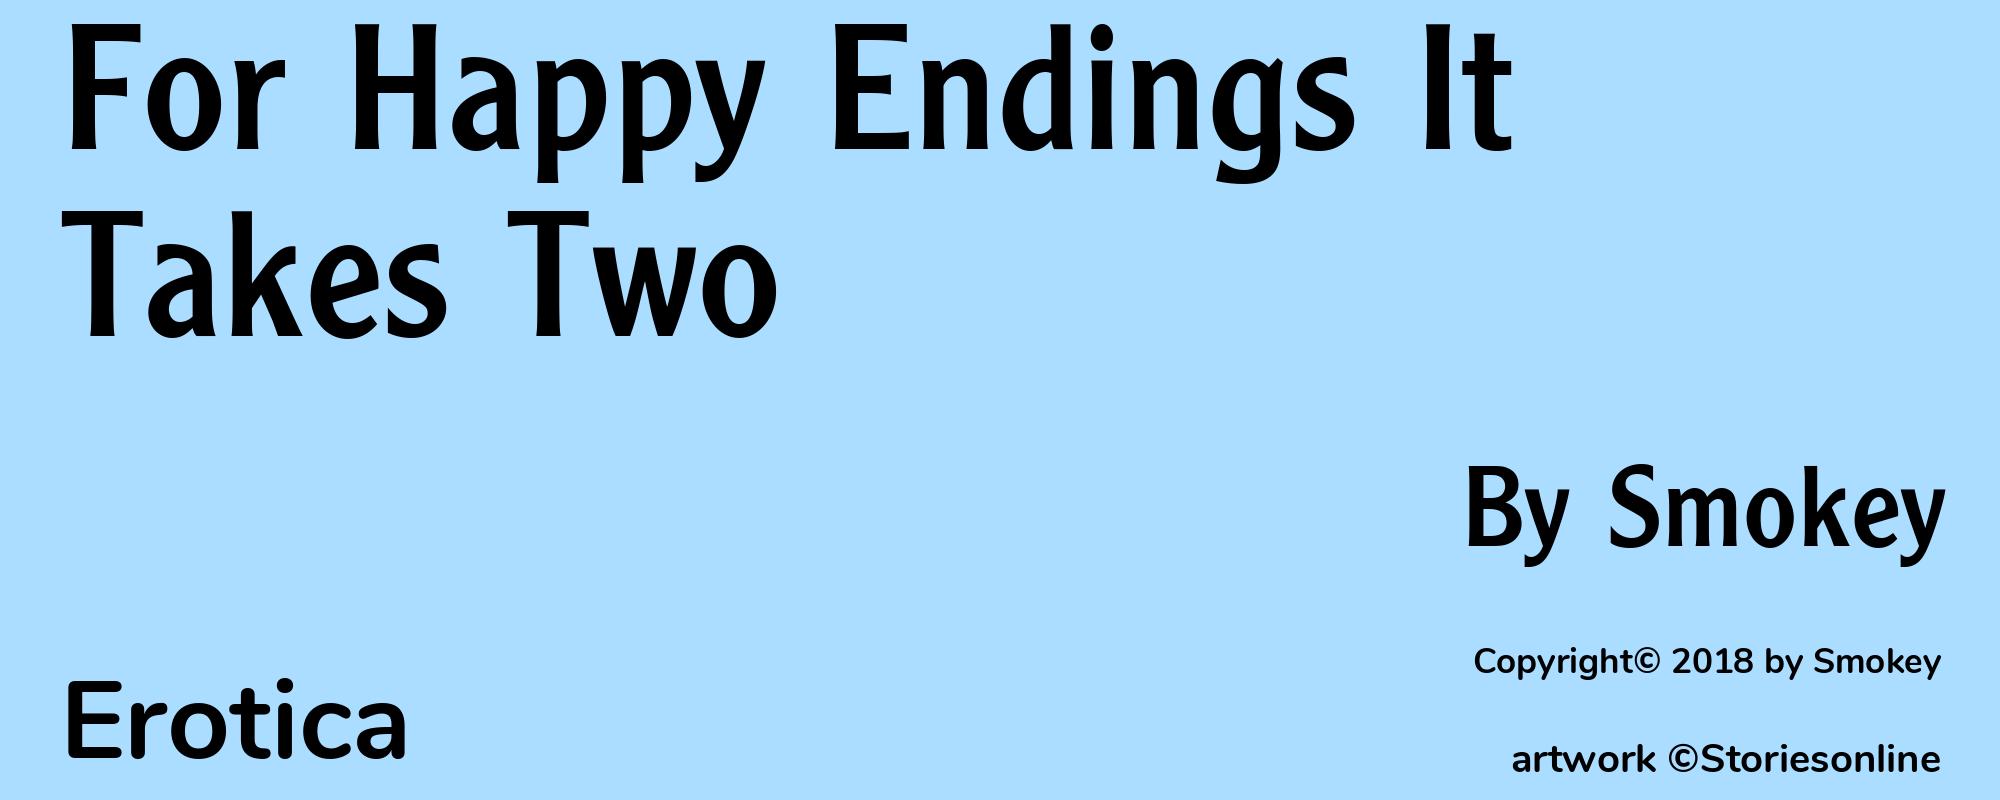 For Happy Endings It Takes Two - Cover